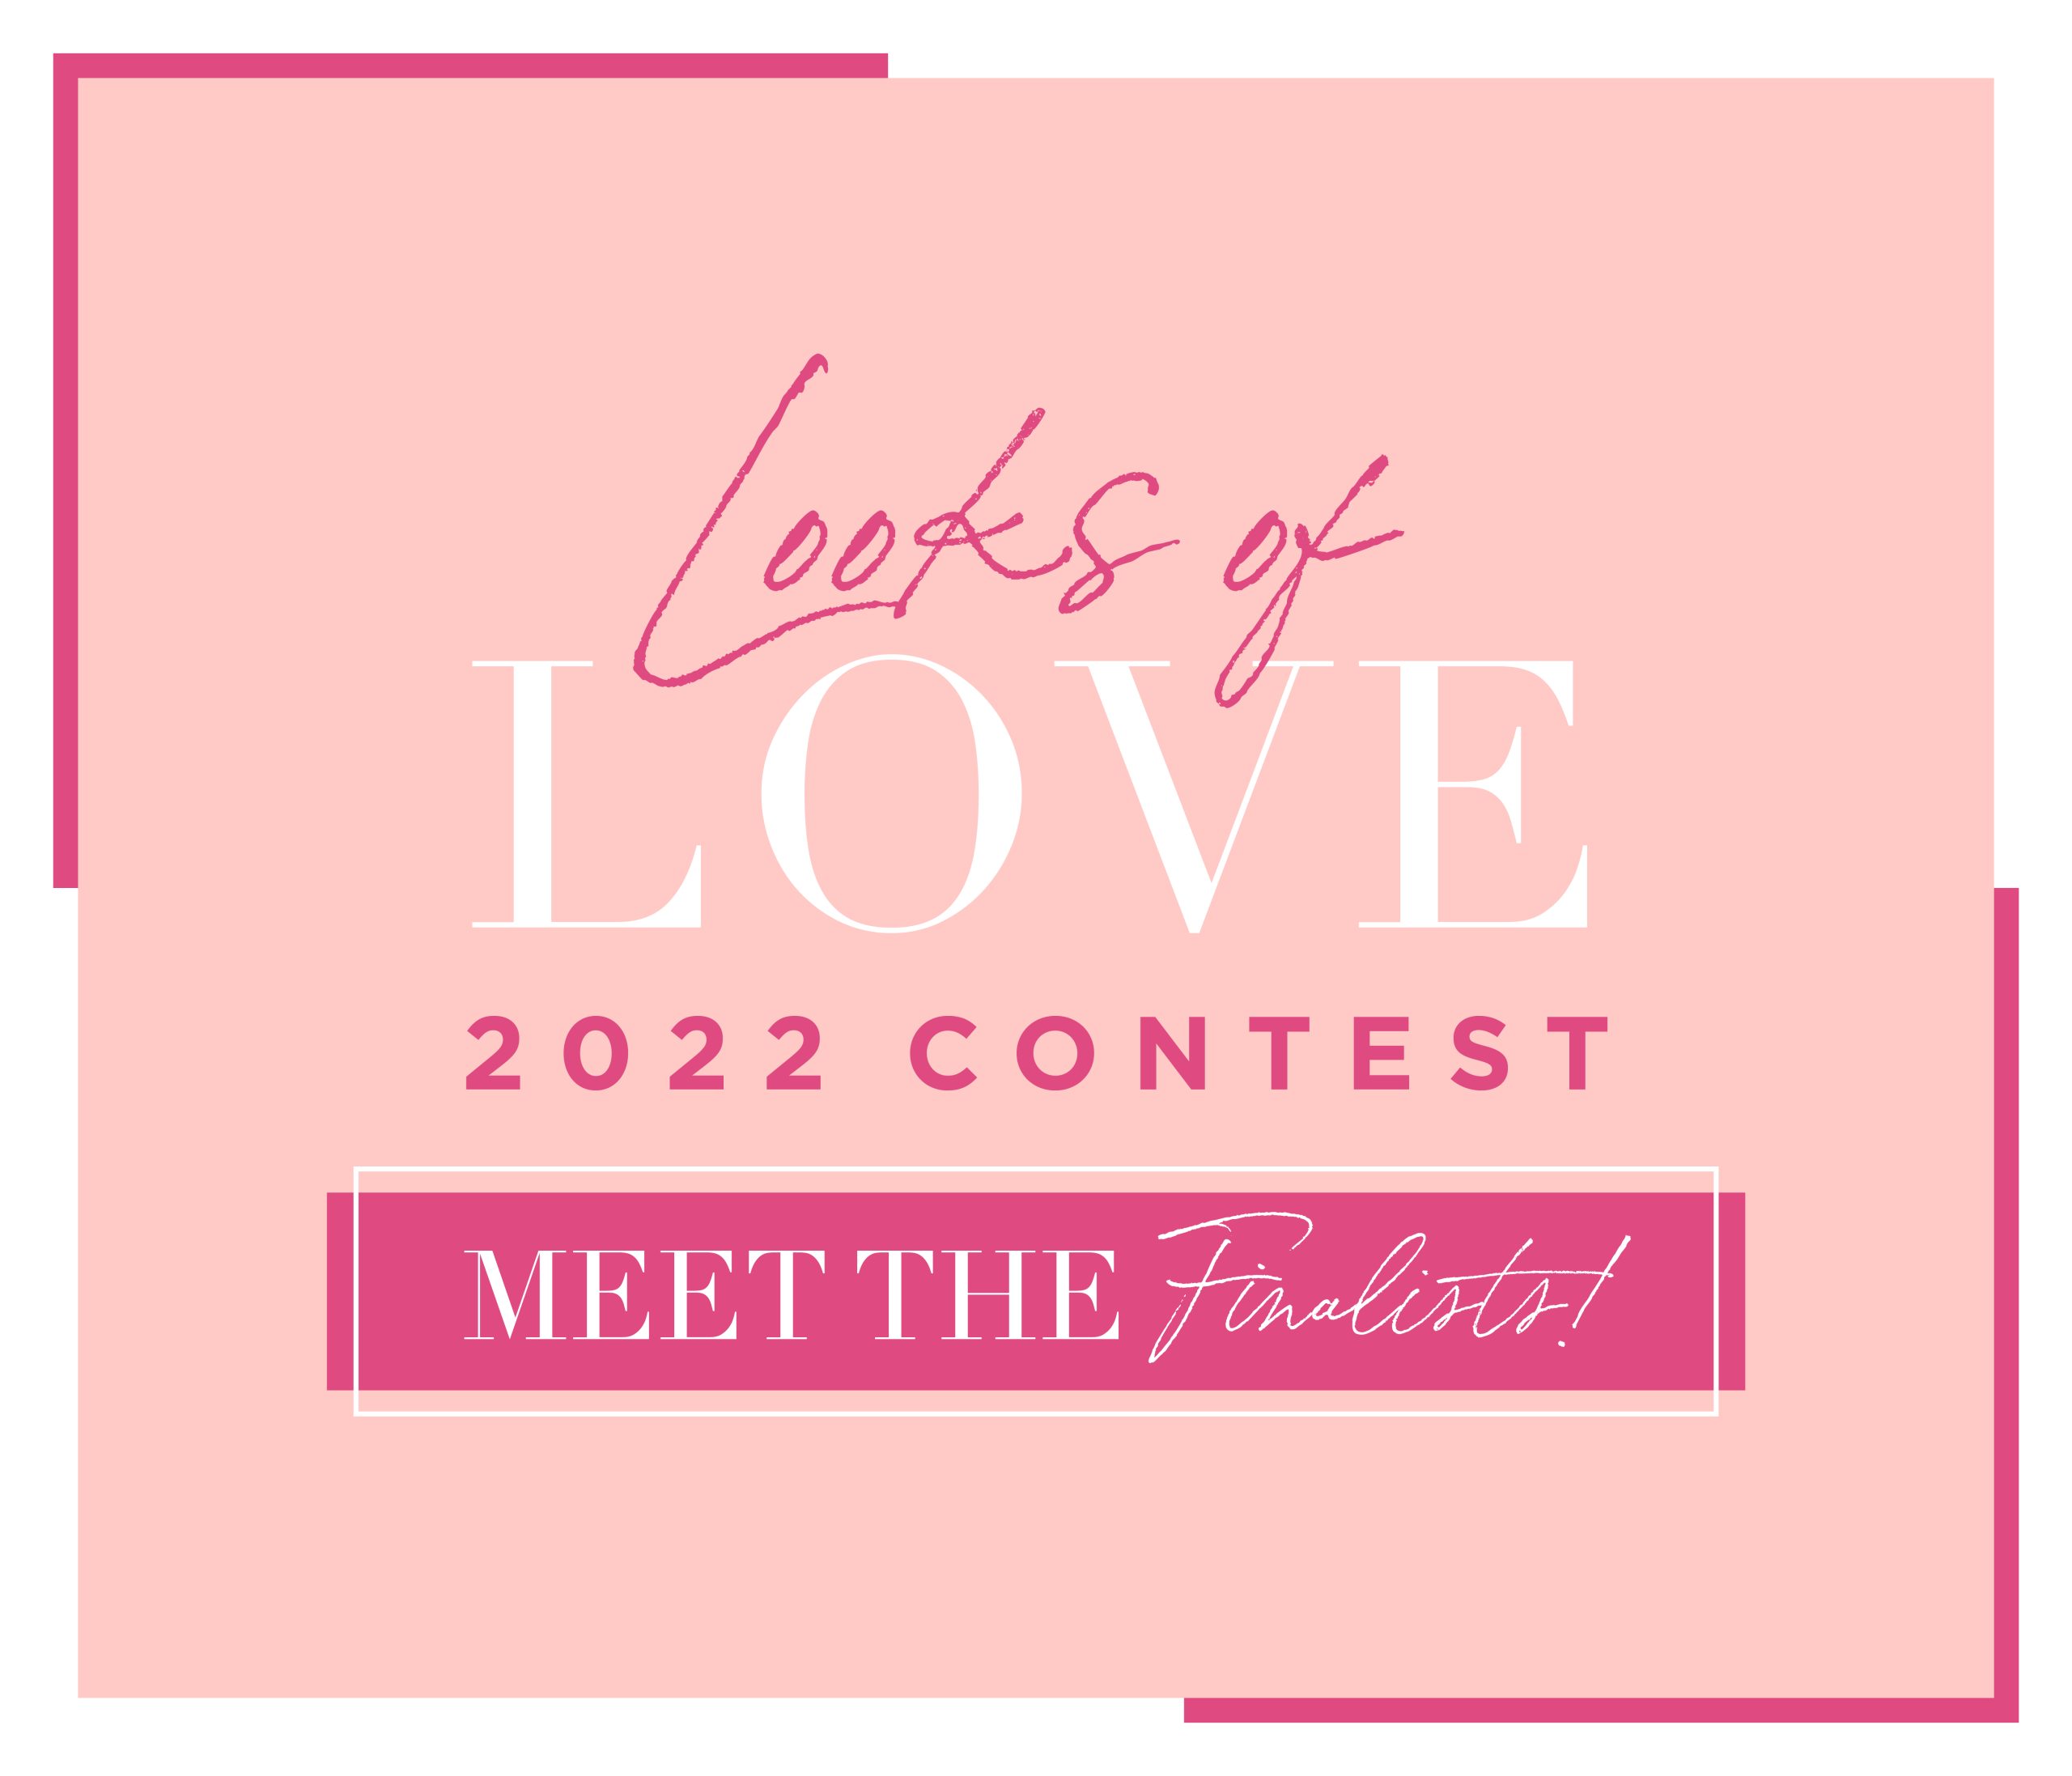 Looks of Love Contest Finalists